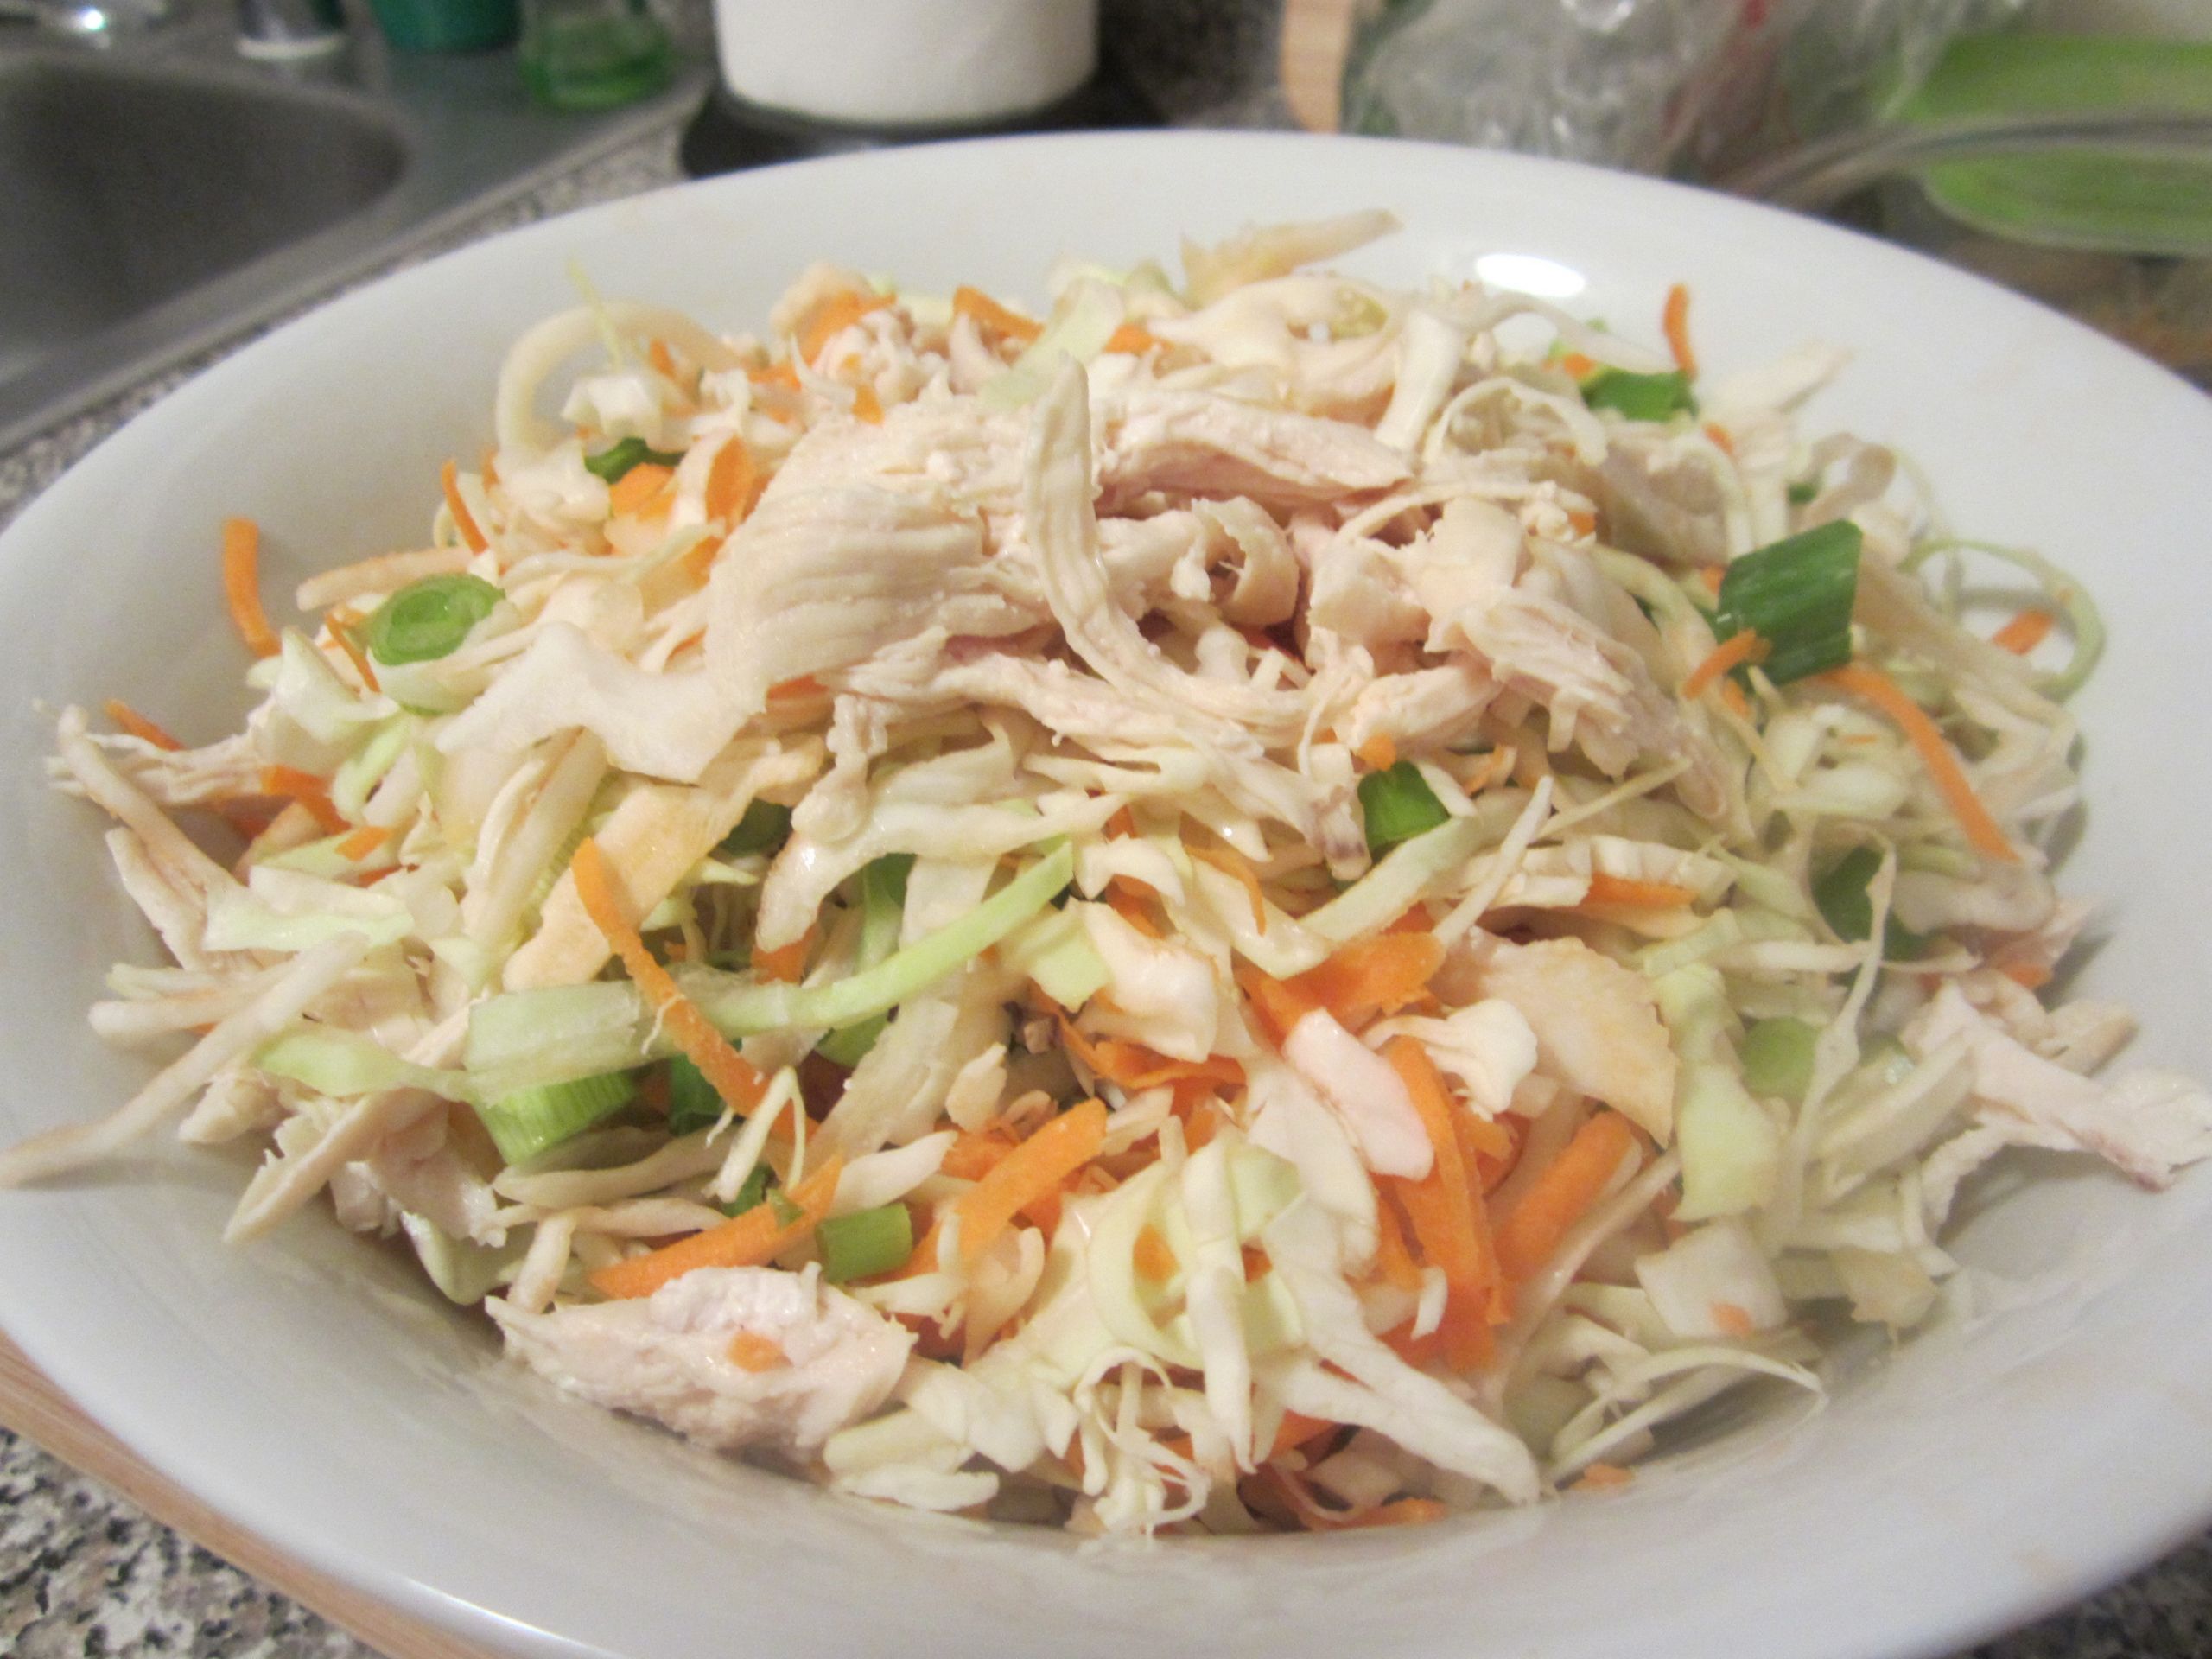 Chicken Cabbage Salad
 Week 42 Chopped Chicken Cabbage Salad – Bake Broil and Blog